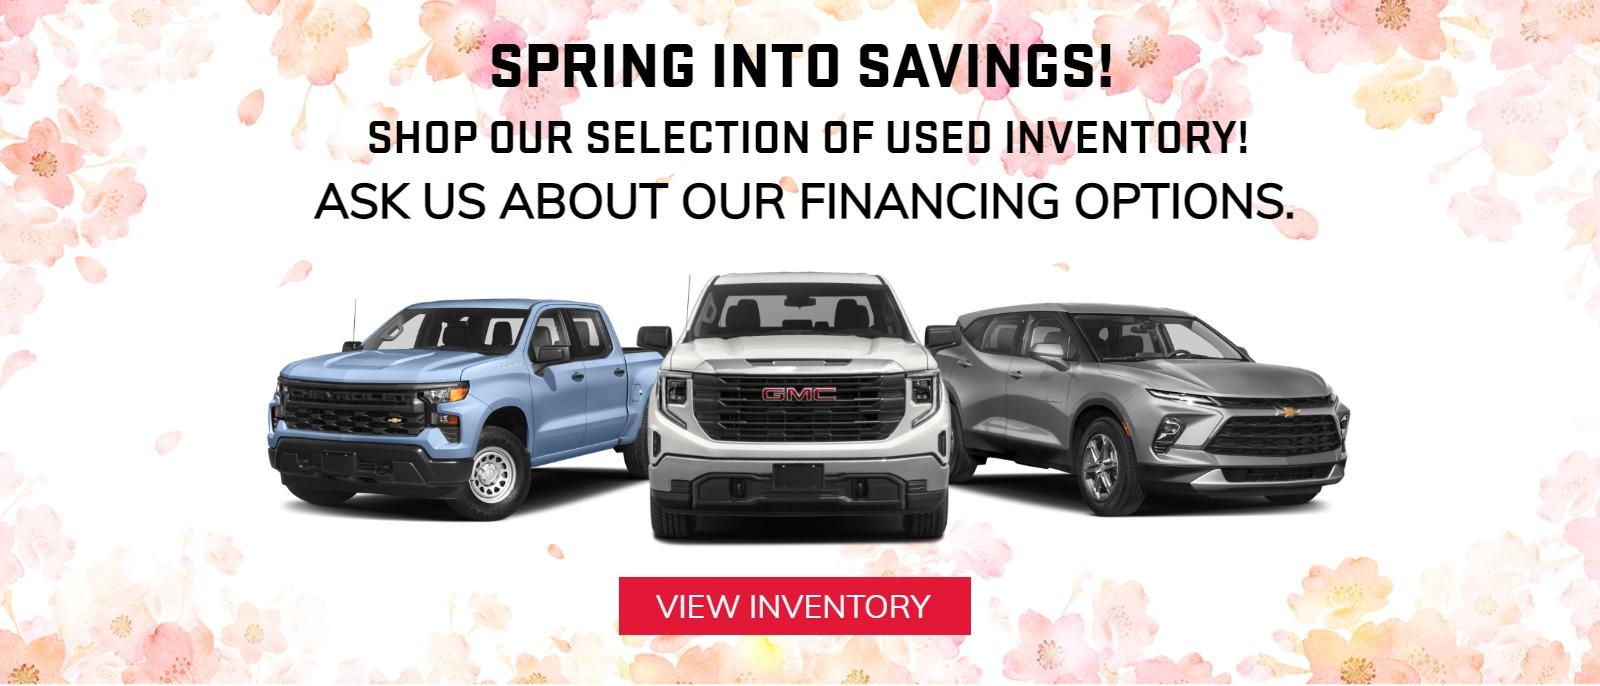 Spring into Savings!

Shop our selection of USED inventory!
Ask us about our financing options.